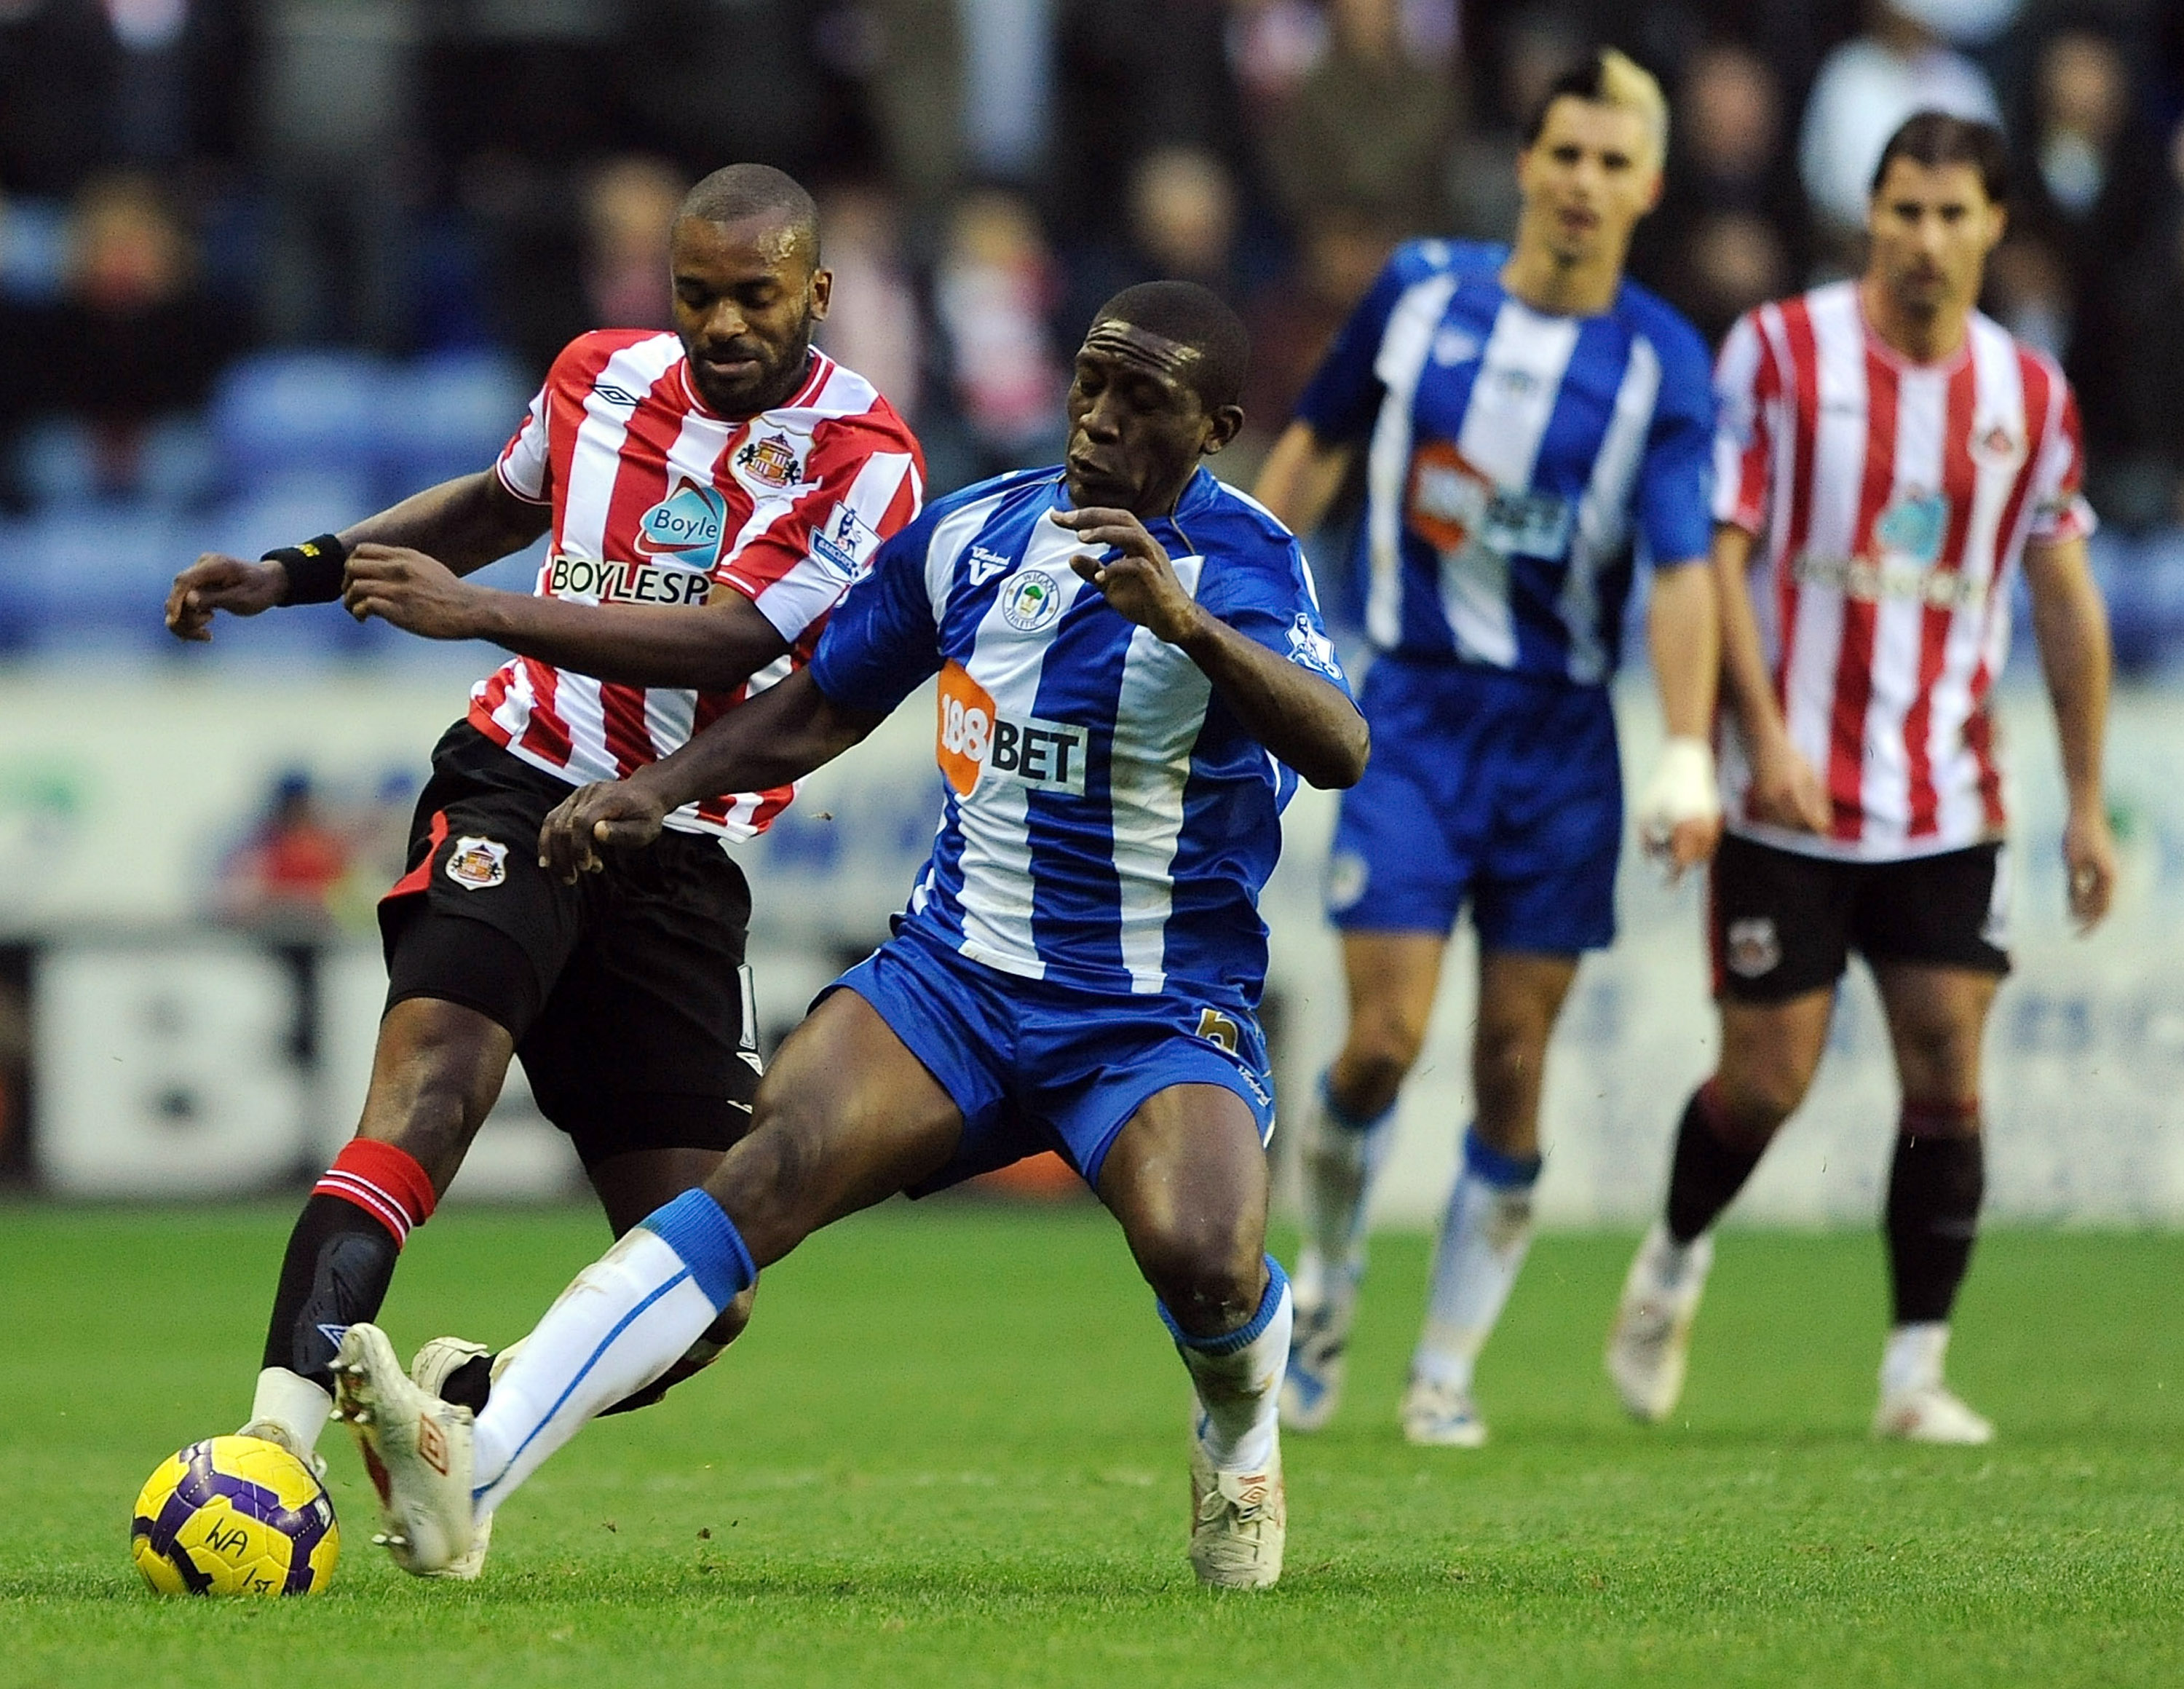 WIGAN, ENGLAND - NOVEMBER 28: Darren Bent of Sunderland battles with Hendry Thomas of Wigan during the Barclays Premier League Match between Wigan Athletic and Sunderland at The DW Stadium on November 28, 2009 in Wigan, England.  (Photo by Laurence Griffi